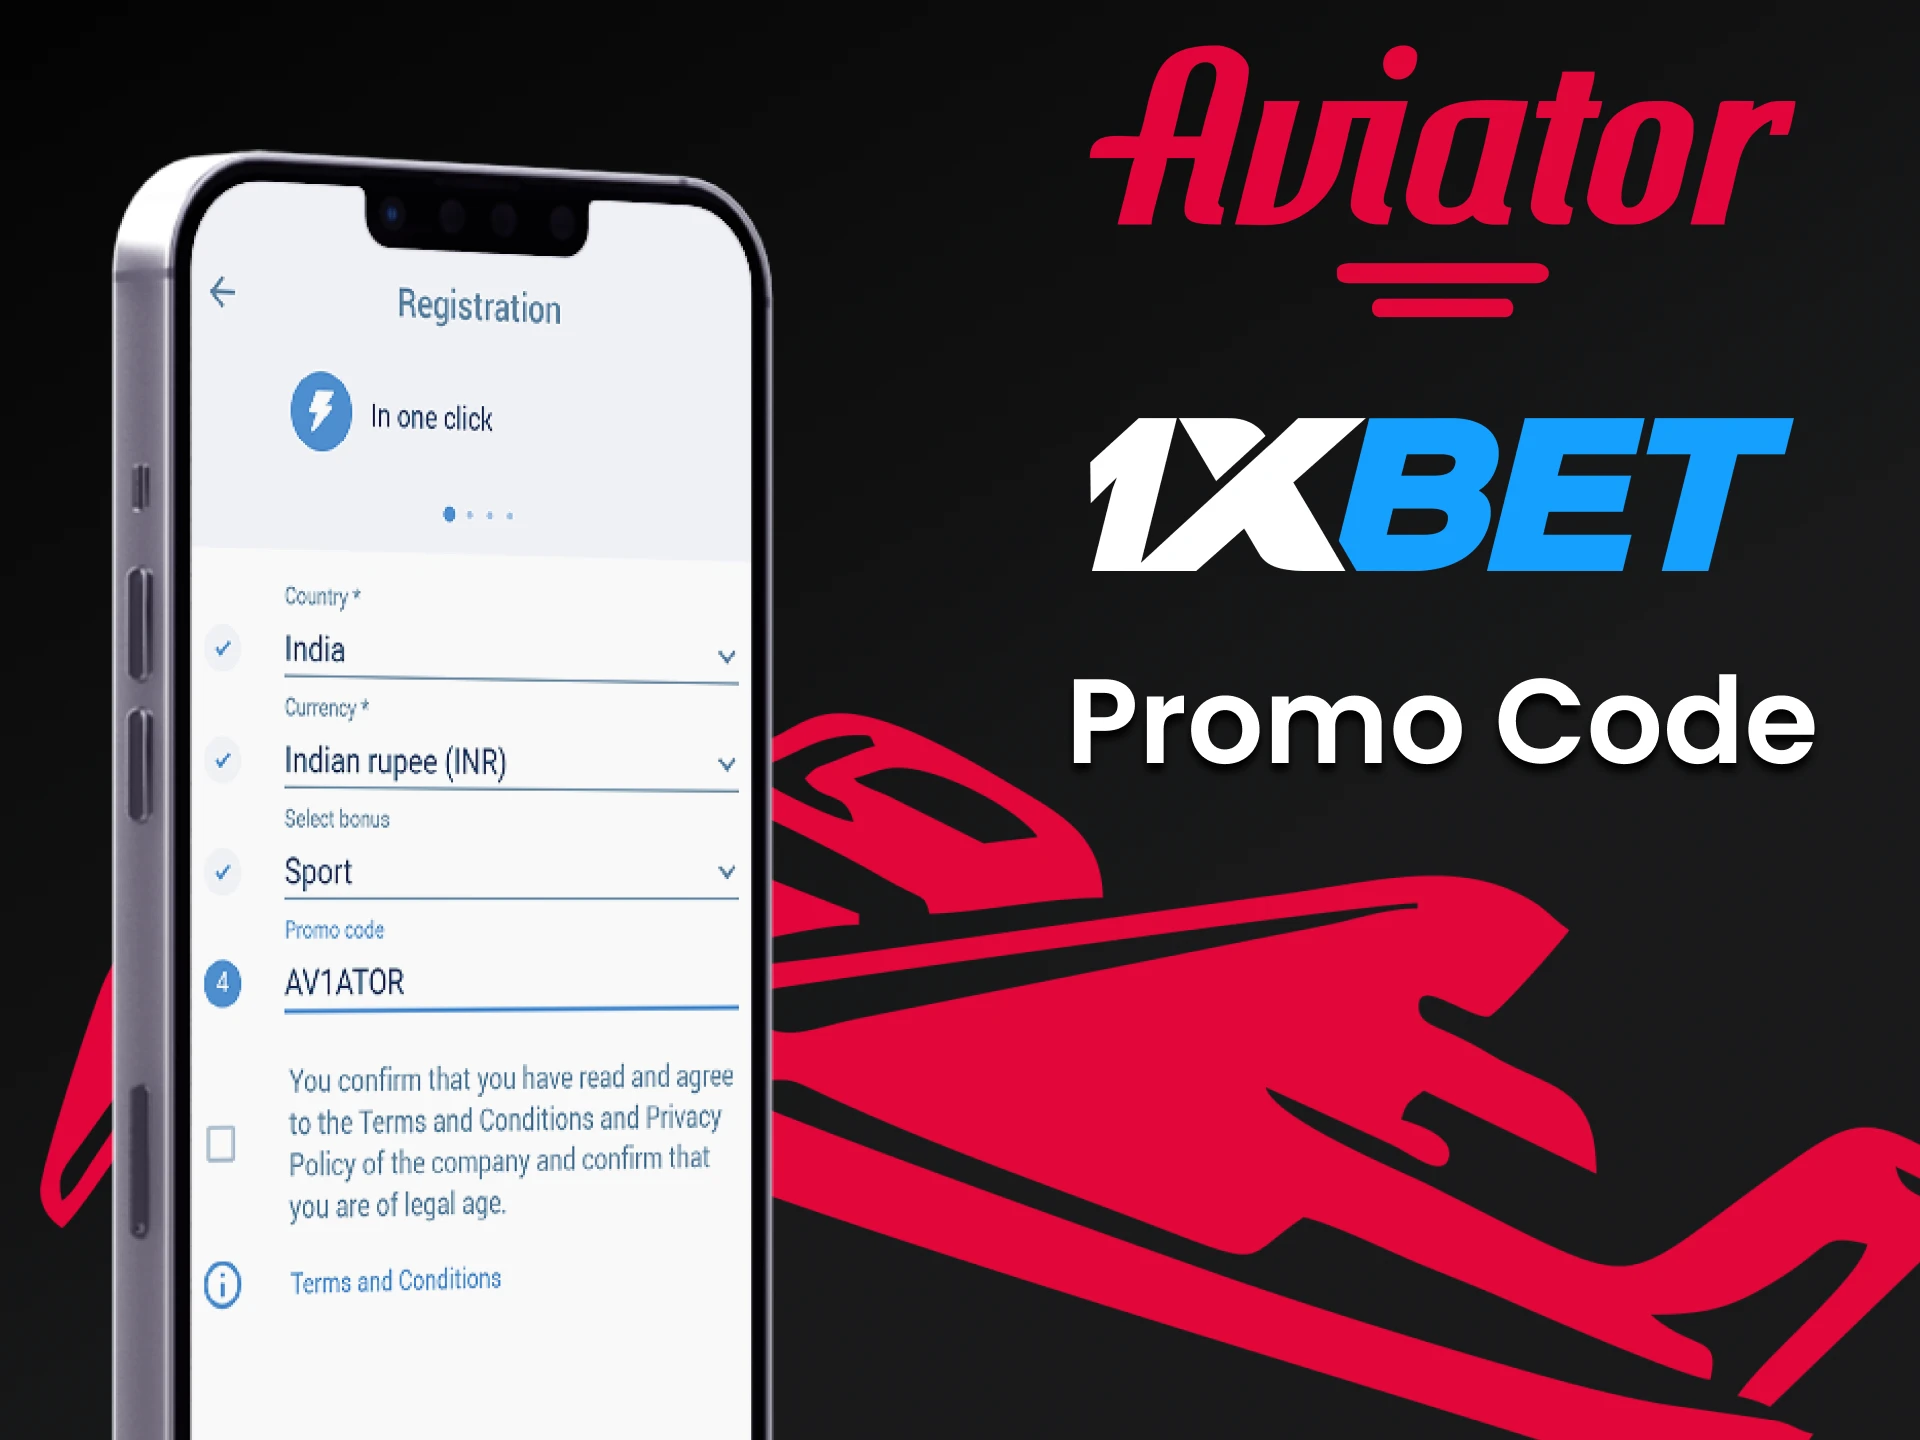 Use promo code from 1xbet.